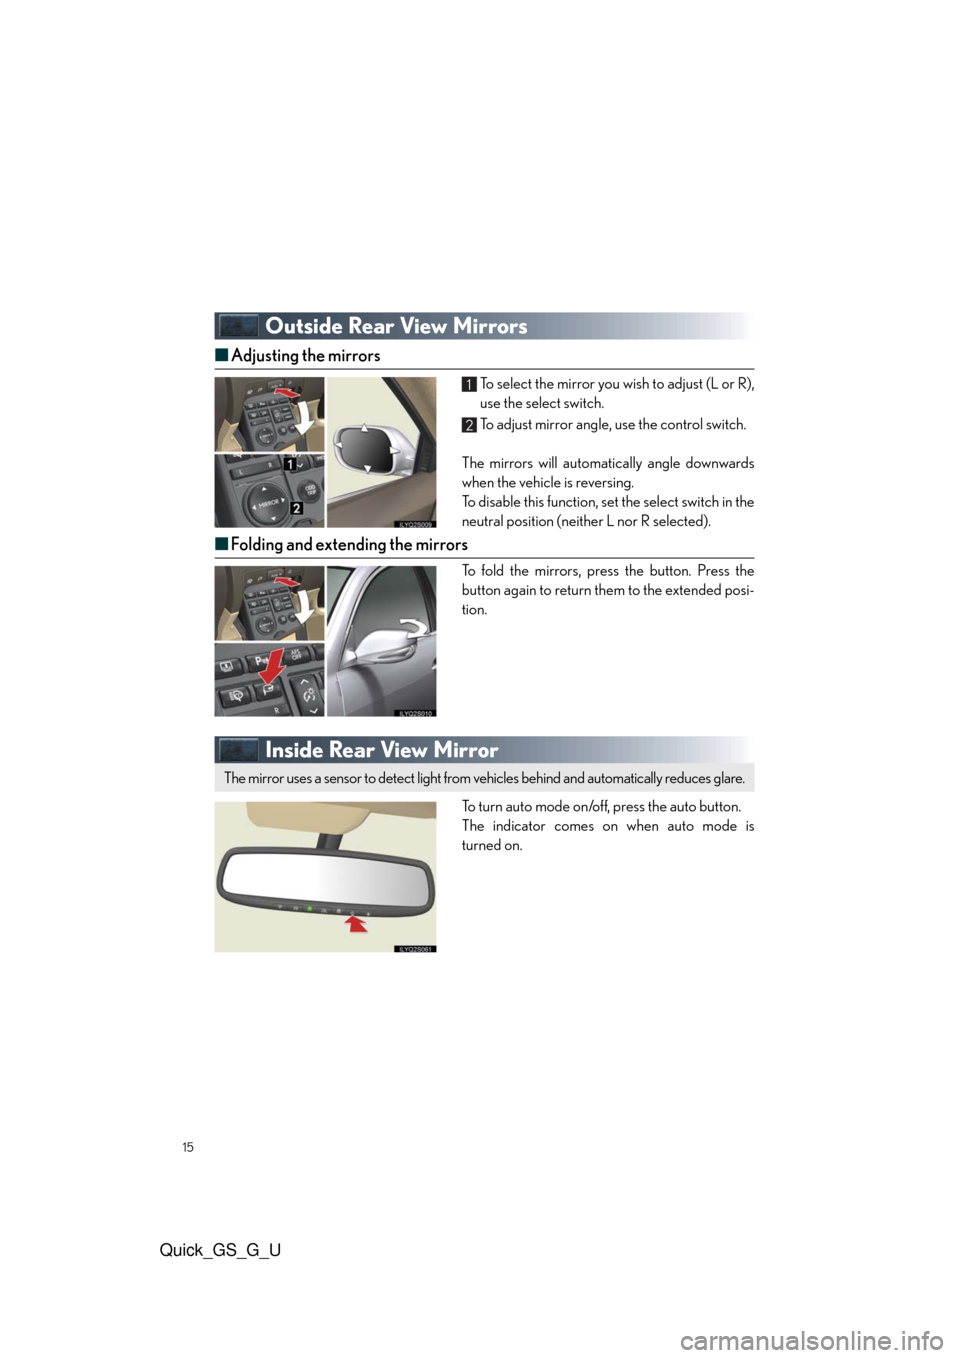 Lexus GS350 2010  Using The Audio System / LEXUS 2010 GS460/350 QUICK GUIDE OWNERS MANUAL (OM30B76U) 15
Quick_GS_G_U
Outside Rear View Mirrors
■Adjusting the mirrors
To select the mirror you wish to adjust (L or R),
use the select switch.
To adjust mirror angle, use the control switch.
The mirrors 